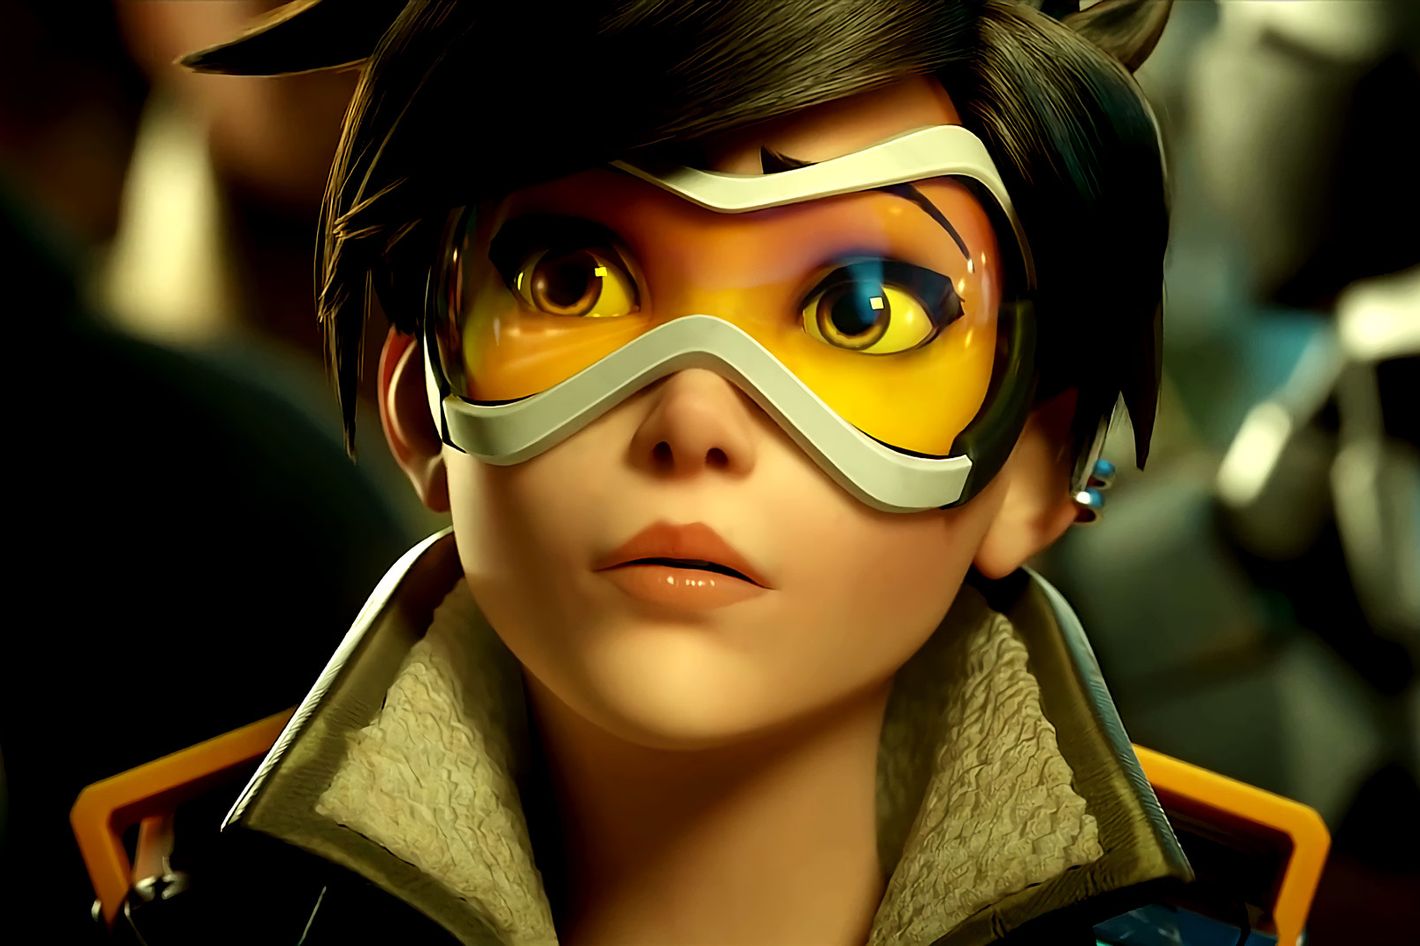 Is Tracer a guy?